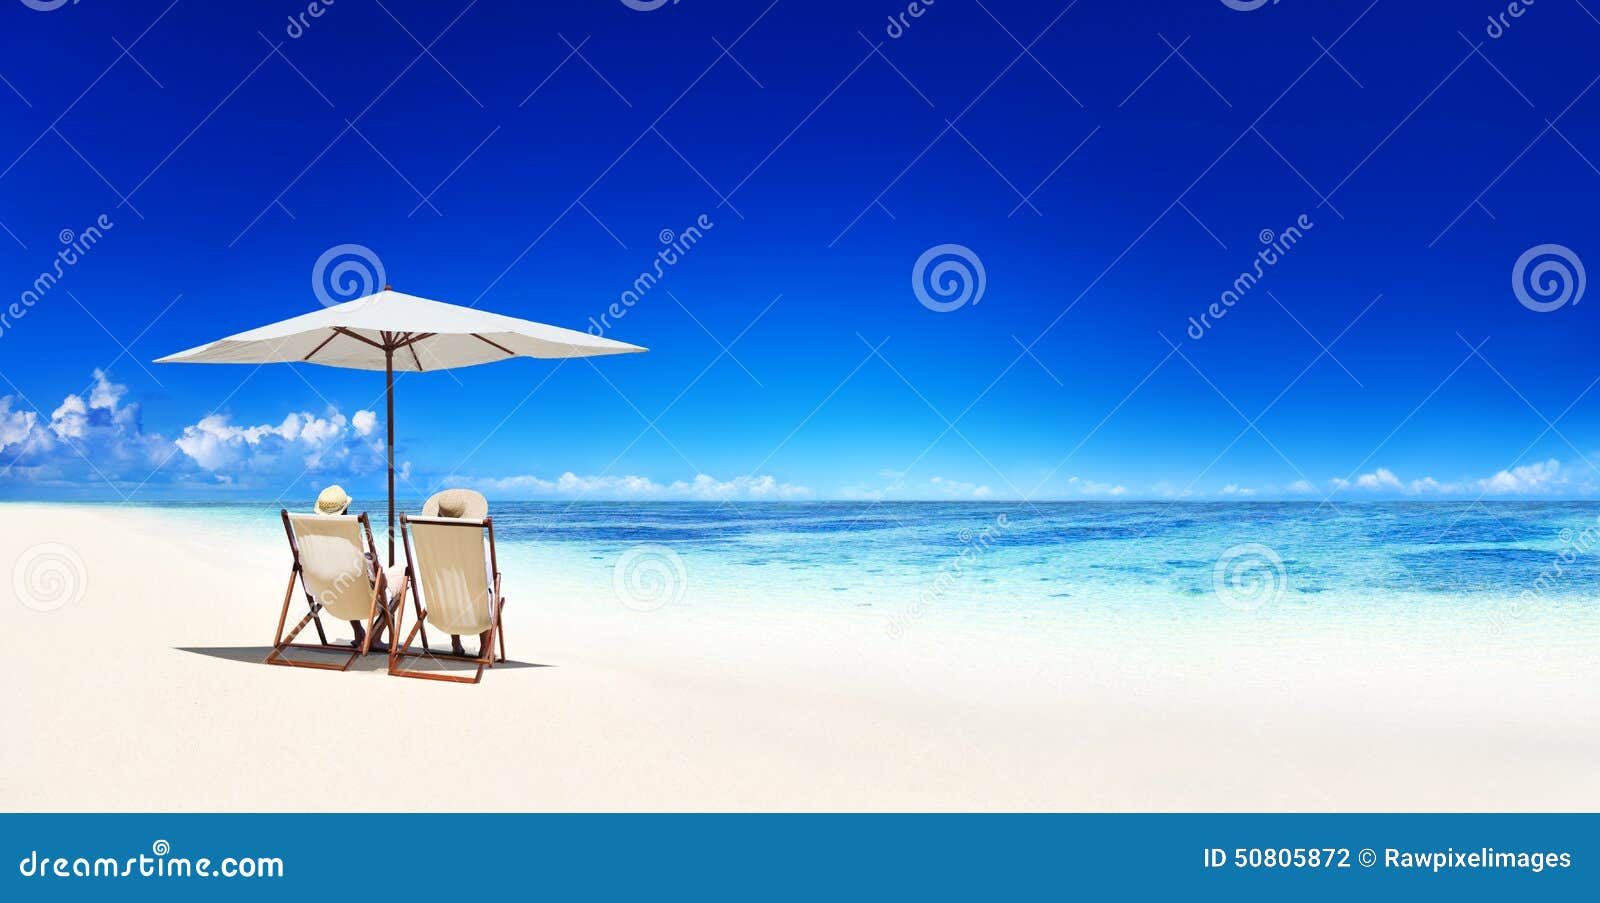 couple relaxing tropical beach vacation concept